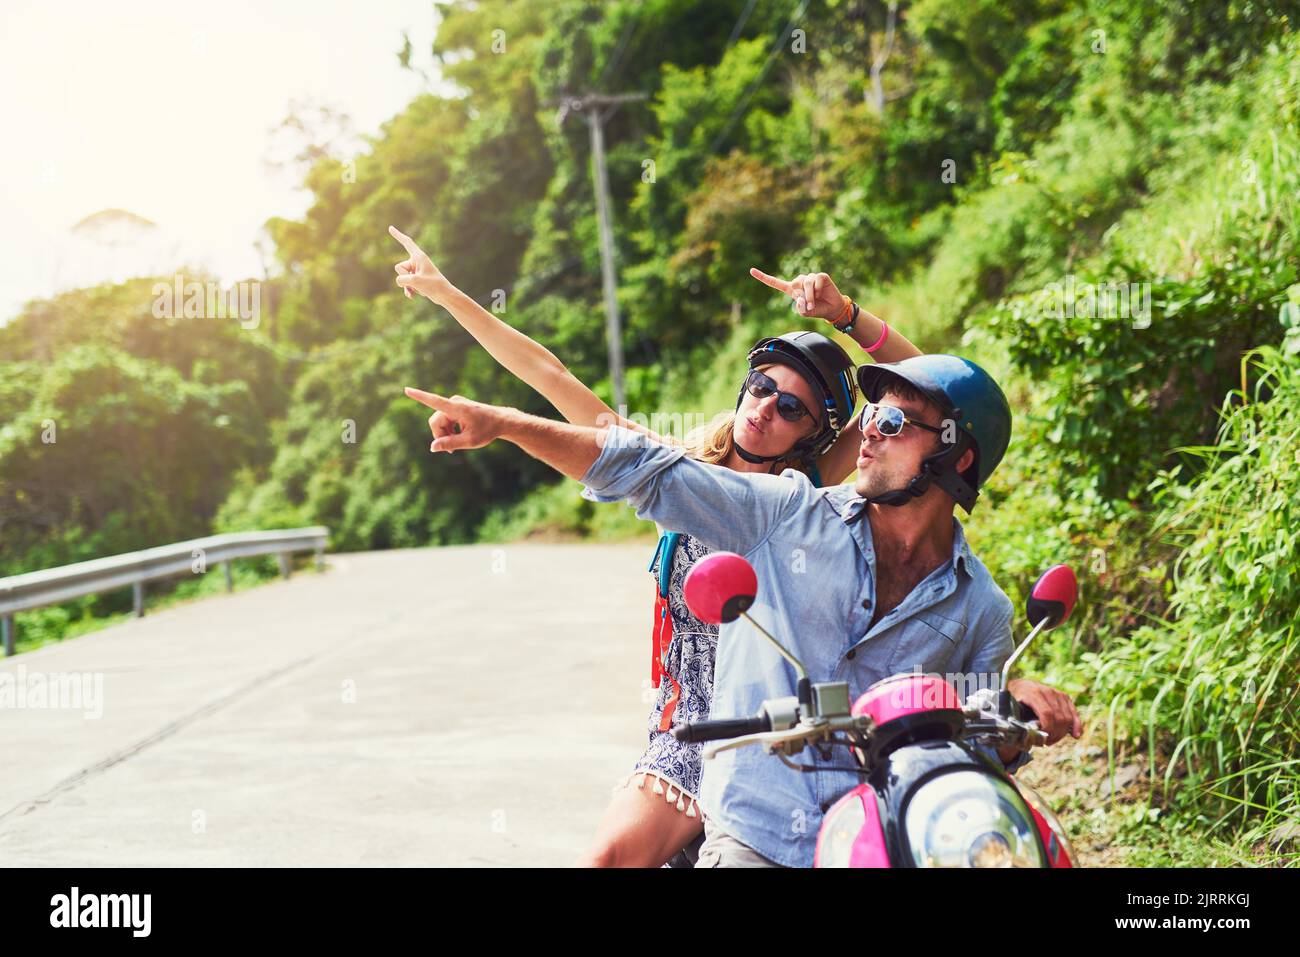 Seeing the sights their favourite way. a happy young couple exploring an exotic destination by scooter. Stock Photo